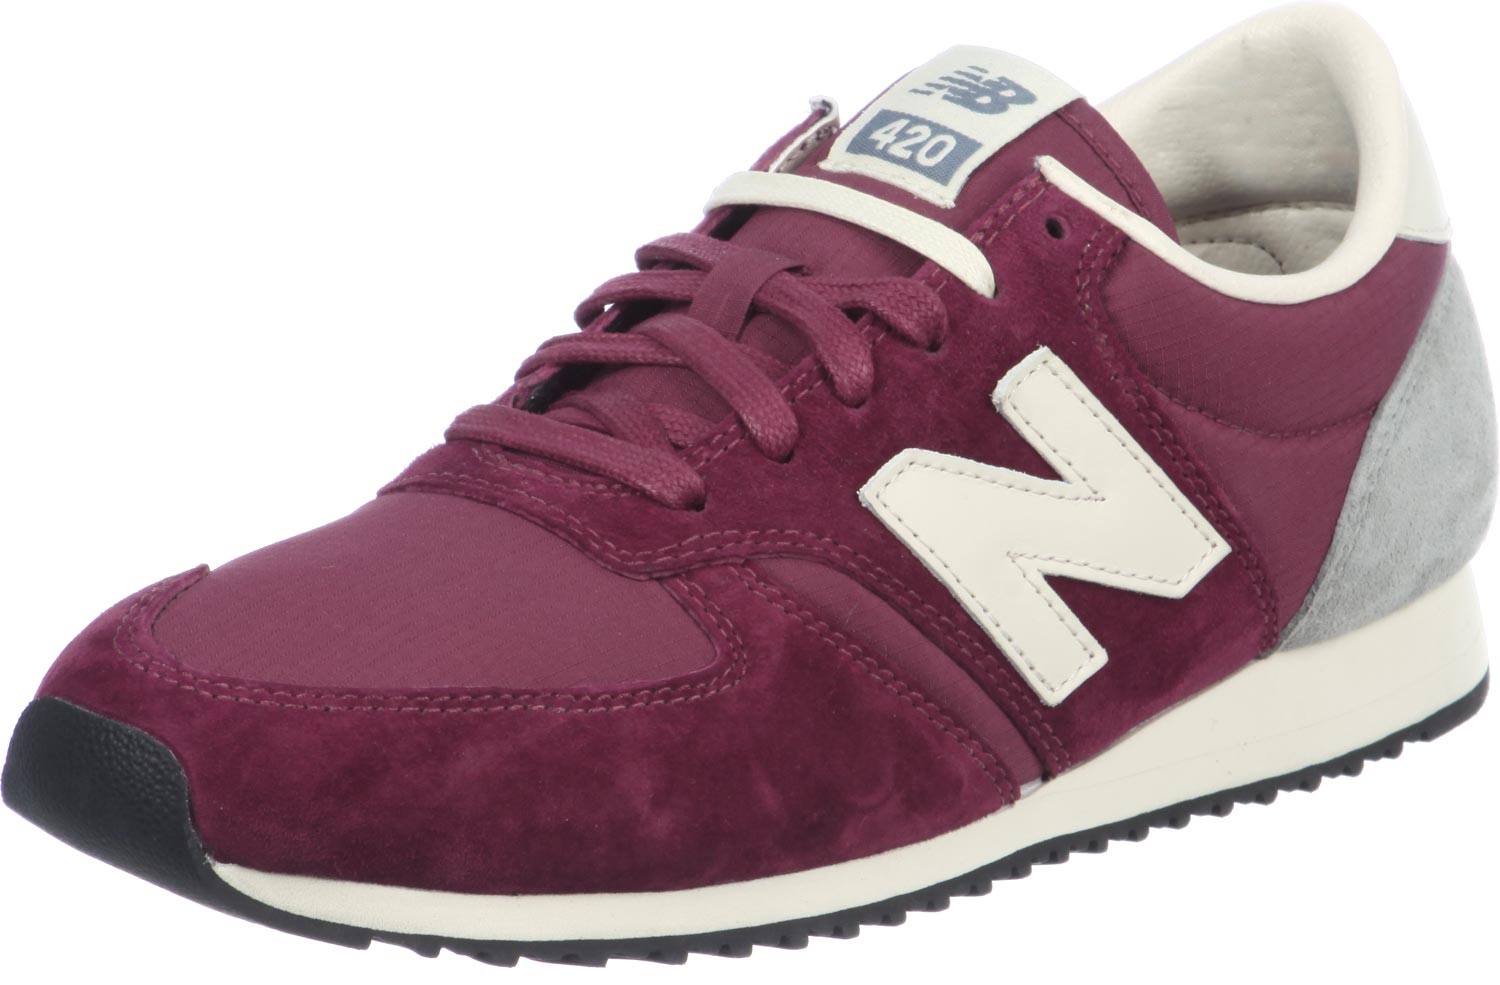 chaussures new balance moins cher, Chaussures New Balance Moins Cher